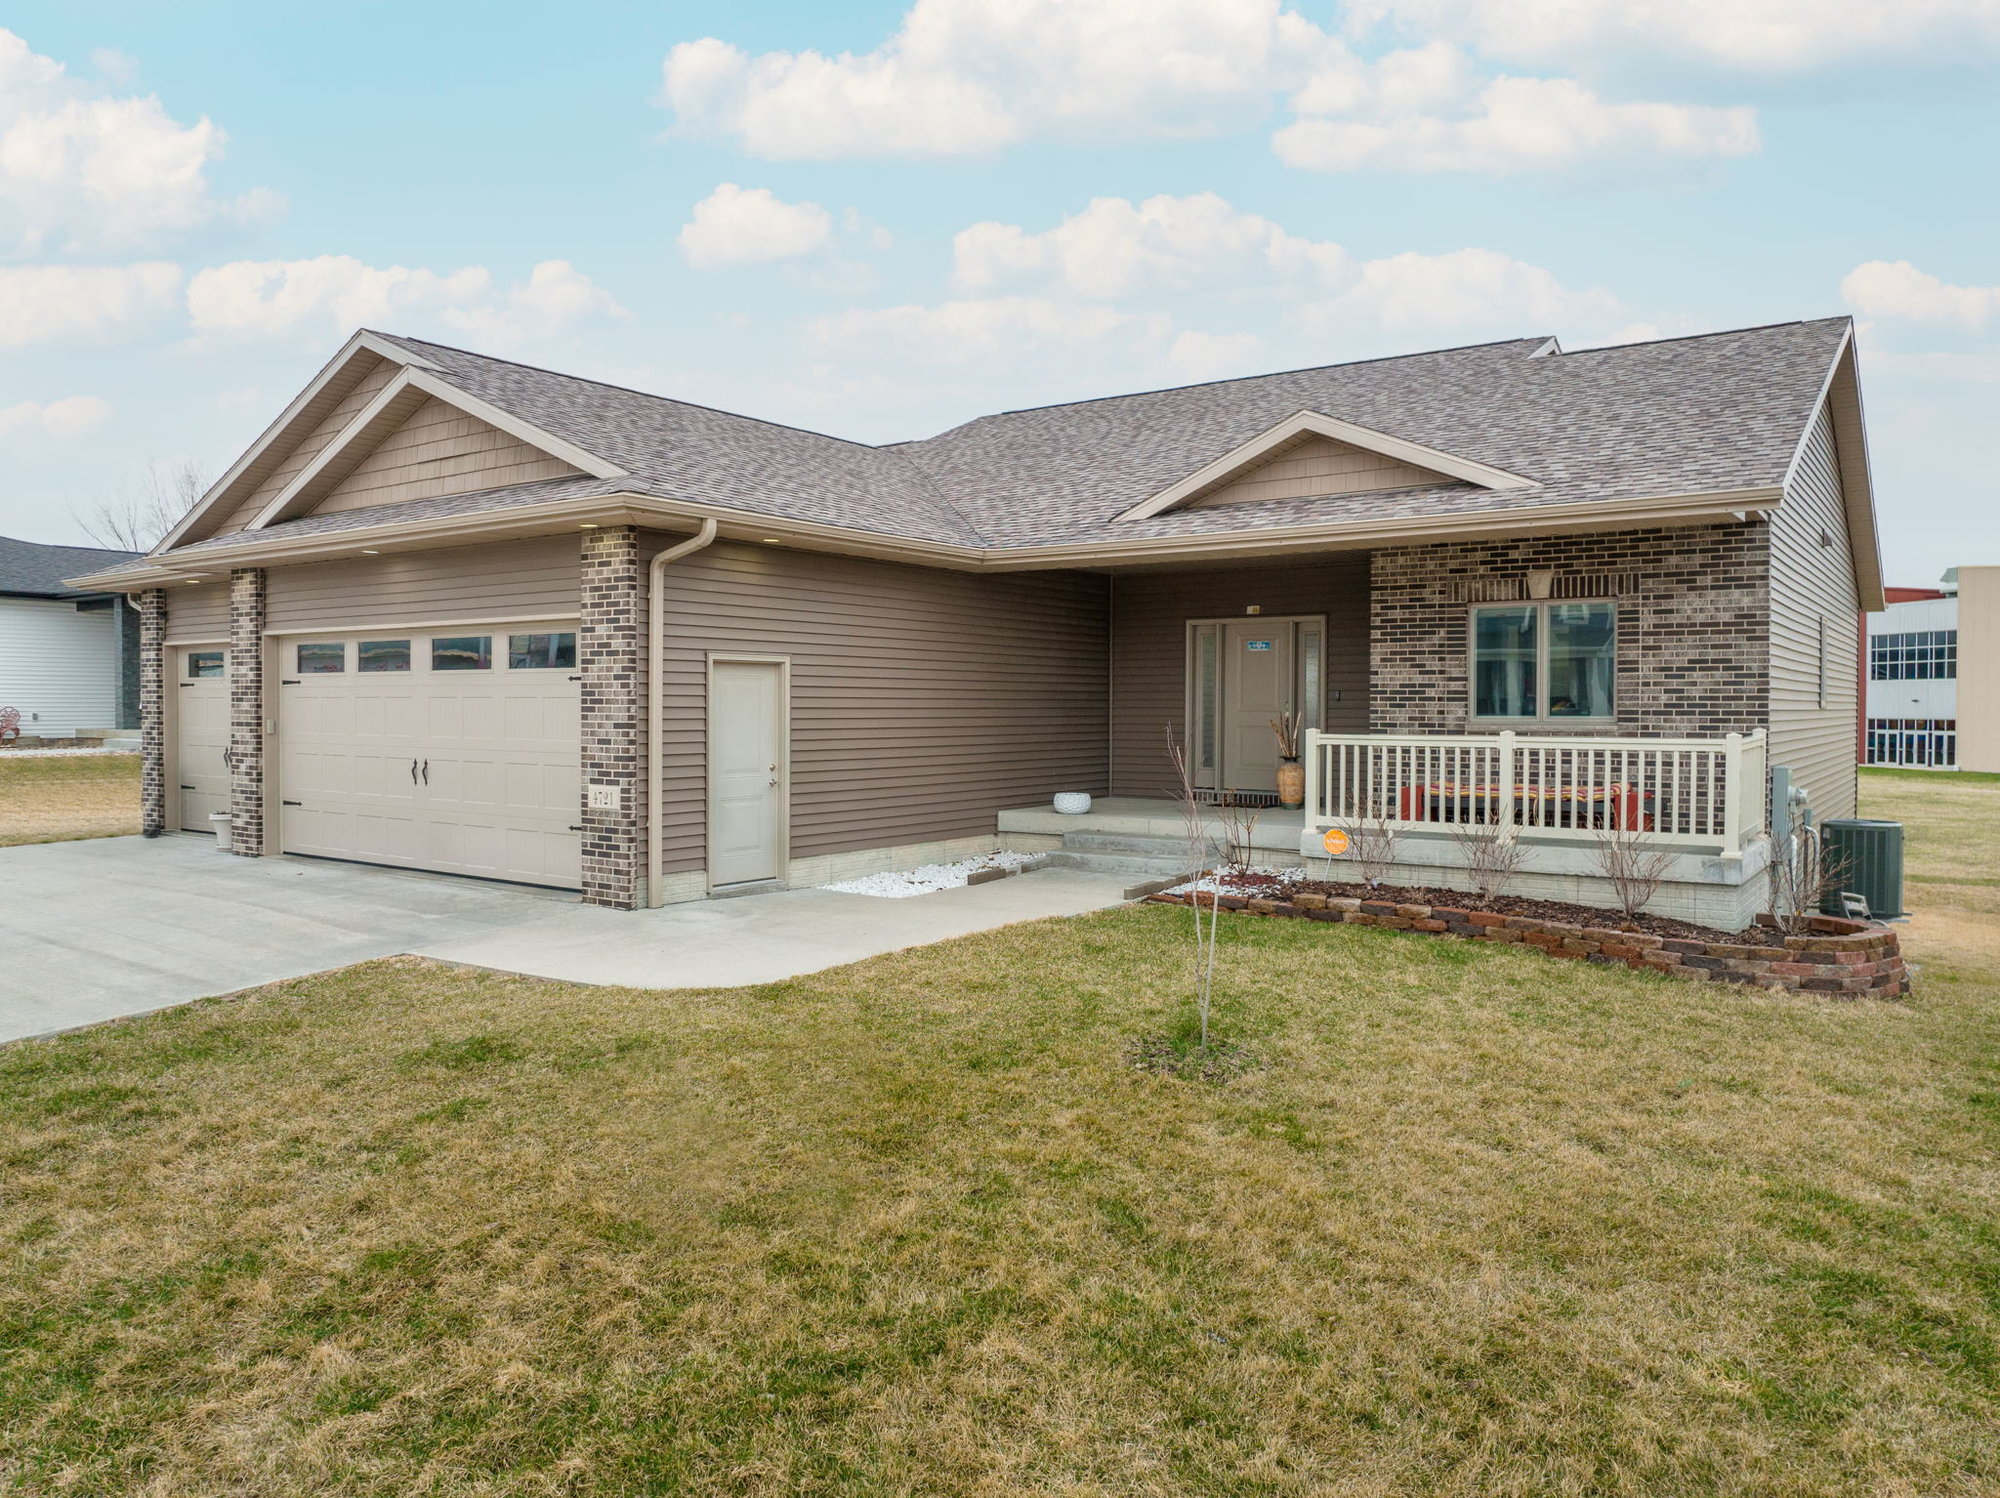 Sleek and Sophisticated Ranch Home for Sale Cedar Falls Iowa